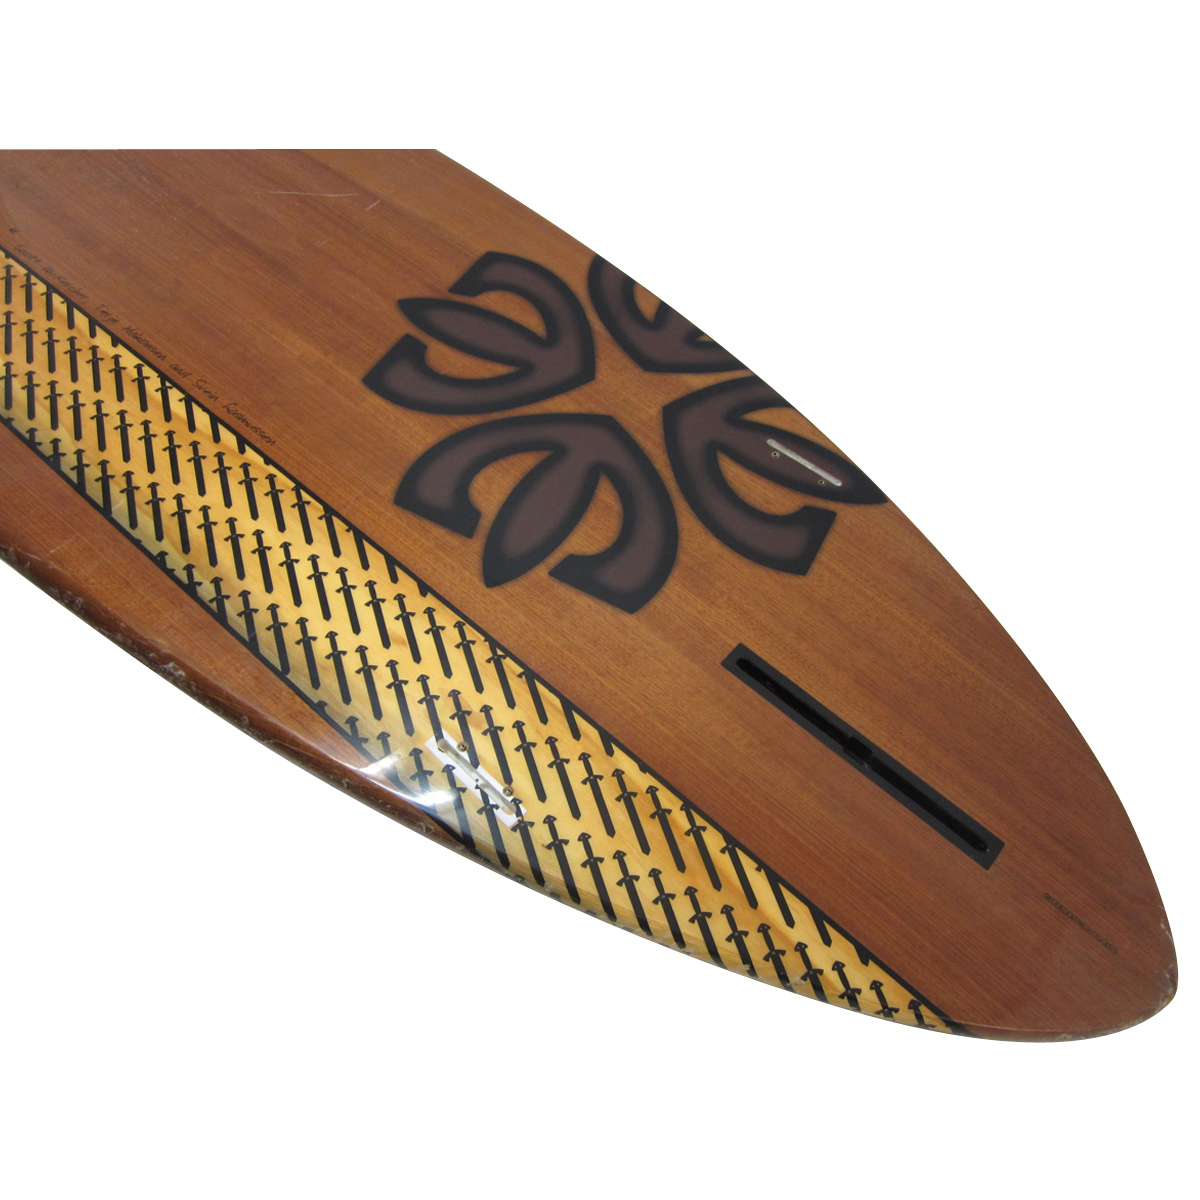 STARBOARD / 9`8 ELEMENT SUP